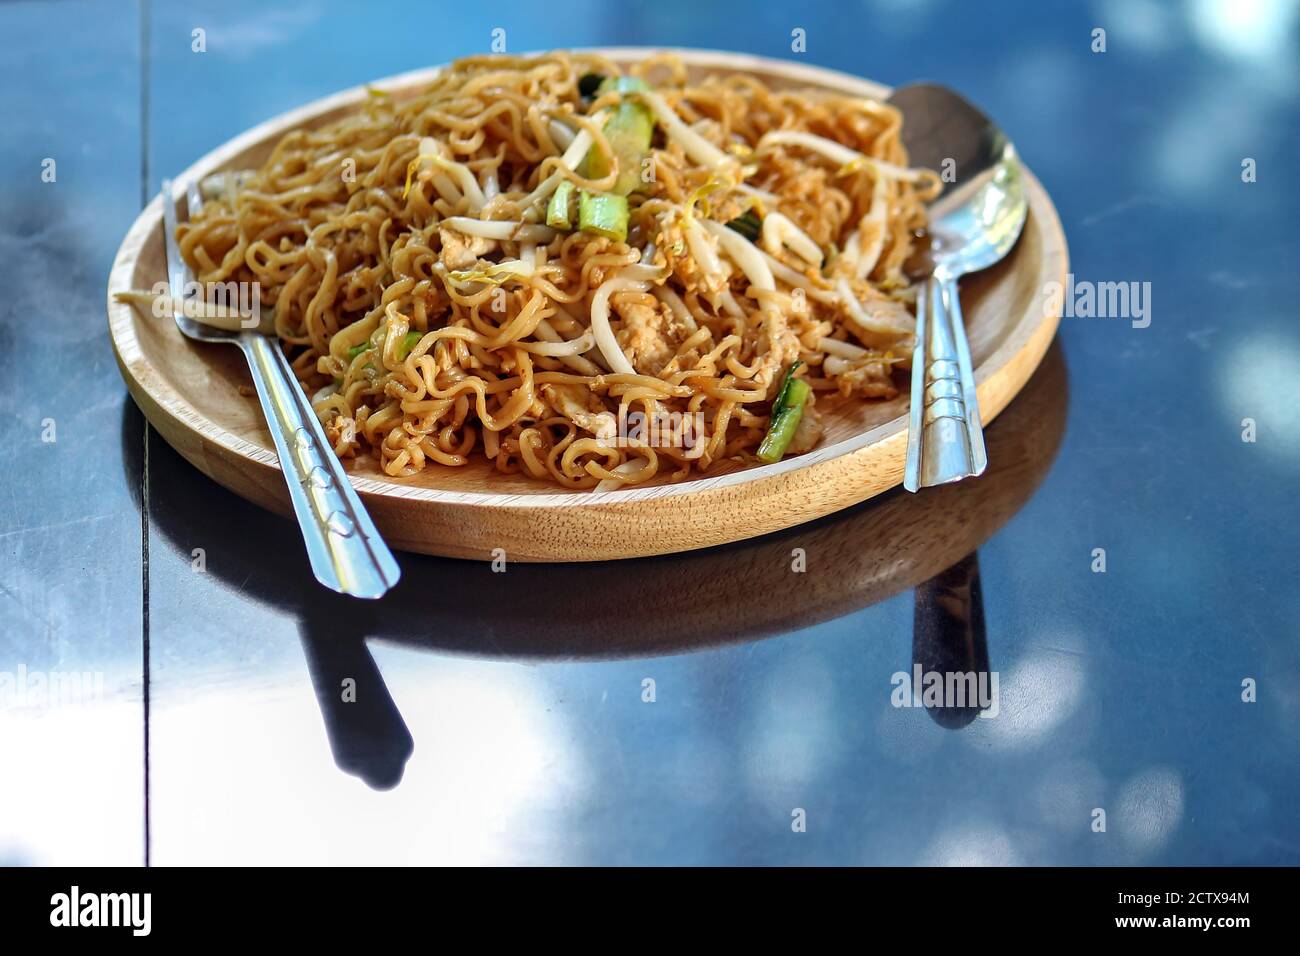 Stir-fry instant noodles, fast food, easy to make at home, put them in a round wooden dish, placed on the marble table in the kitchen. Stock Photo